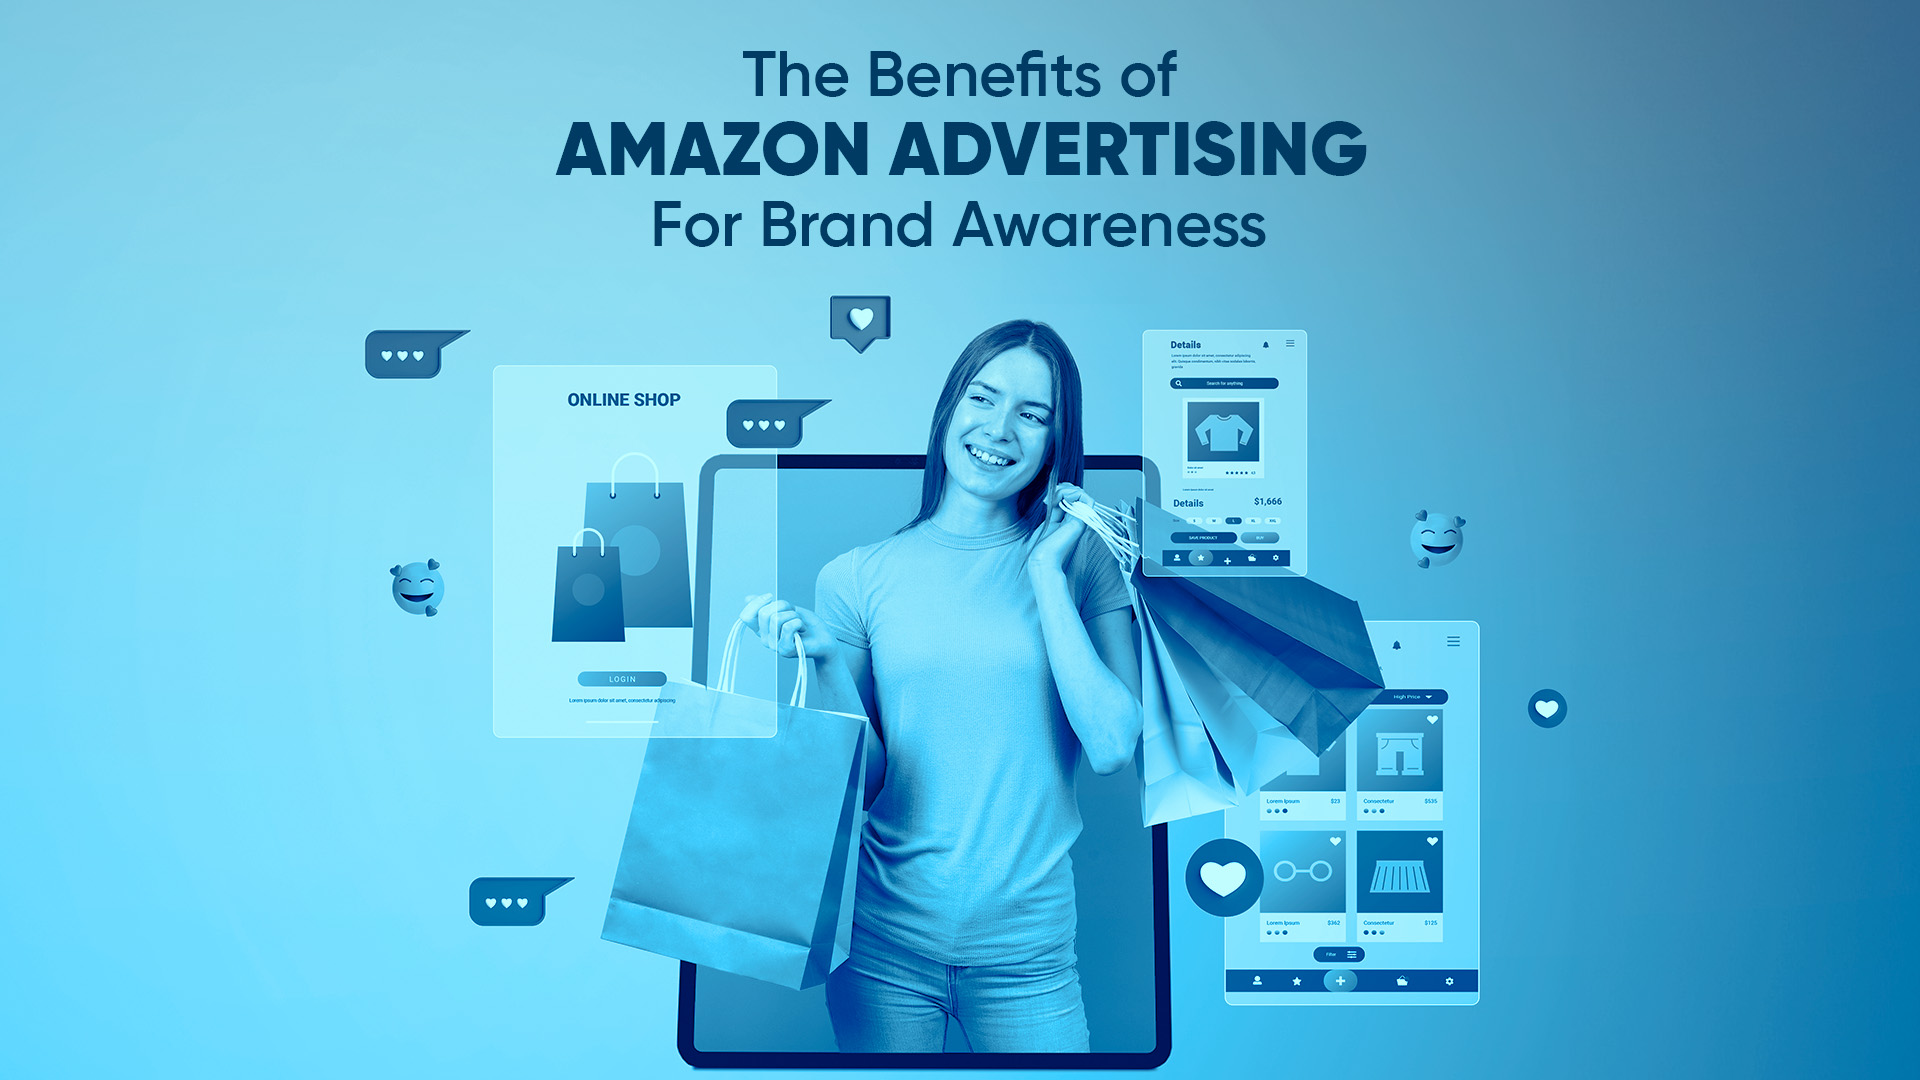 Amazon Advertising for Brand Awareness with BrightBrain